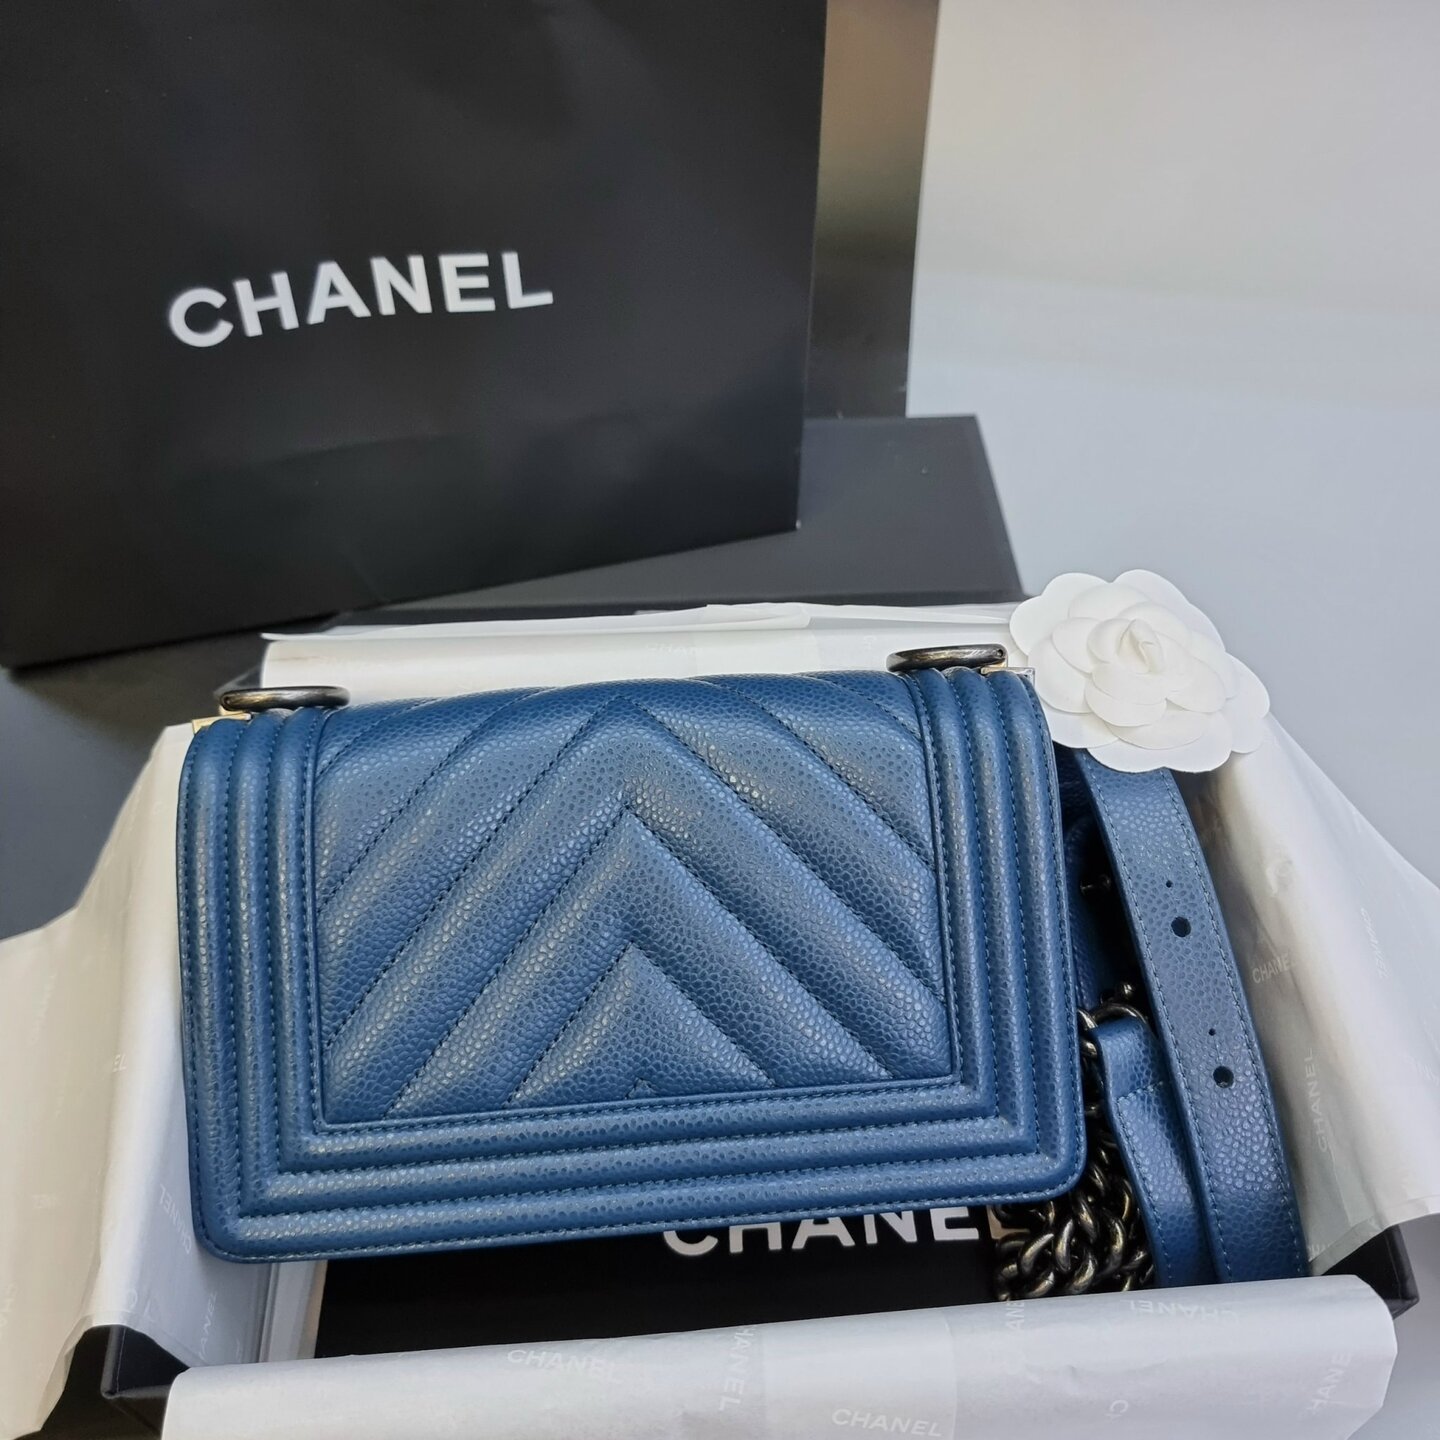 Chanel Boy Bag Size Comparison  Small Vs Medium WHICH IS BEST   YouTube